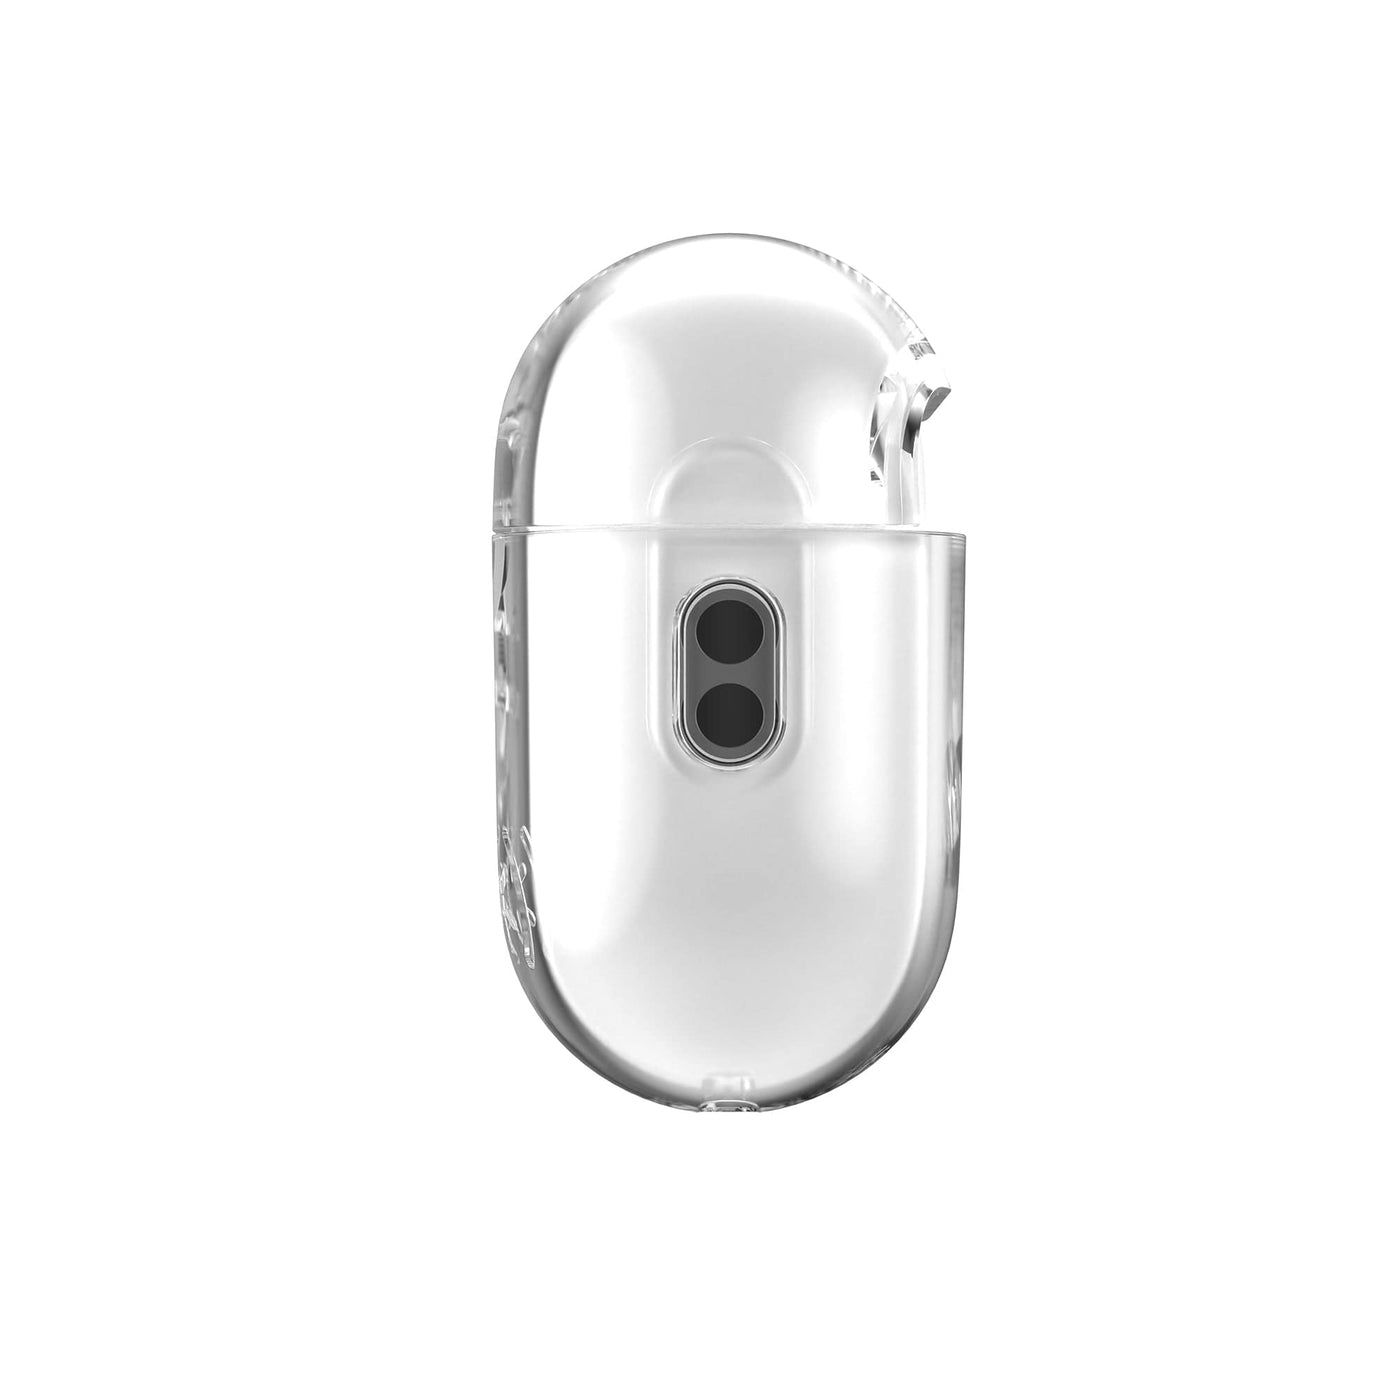  VISOOM Airpods Pro 2nd Generation Case - Airpods Pro 2